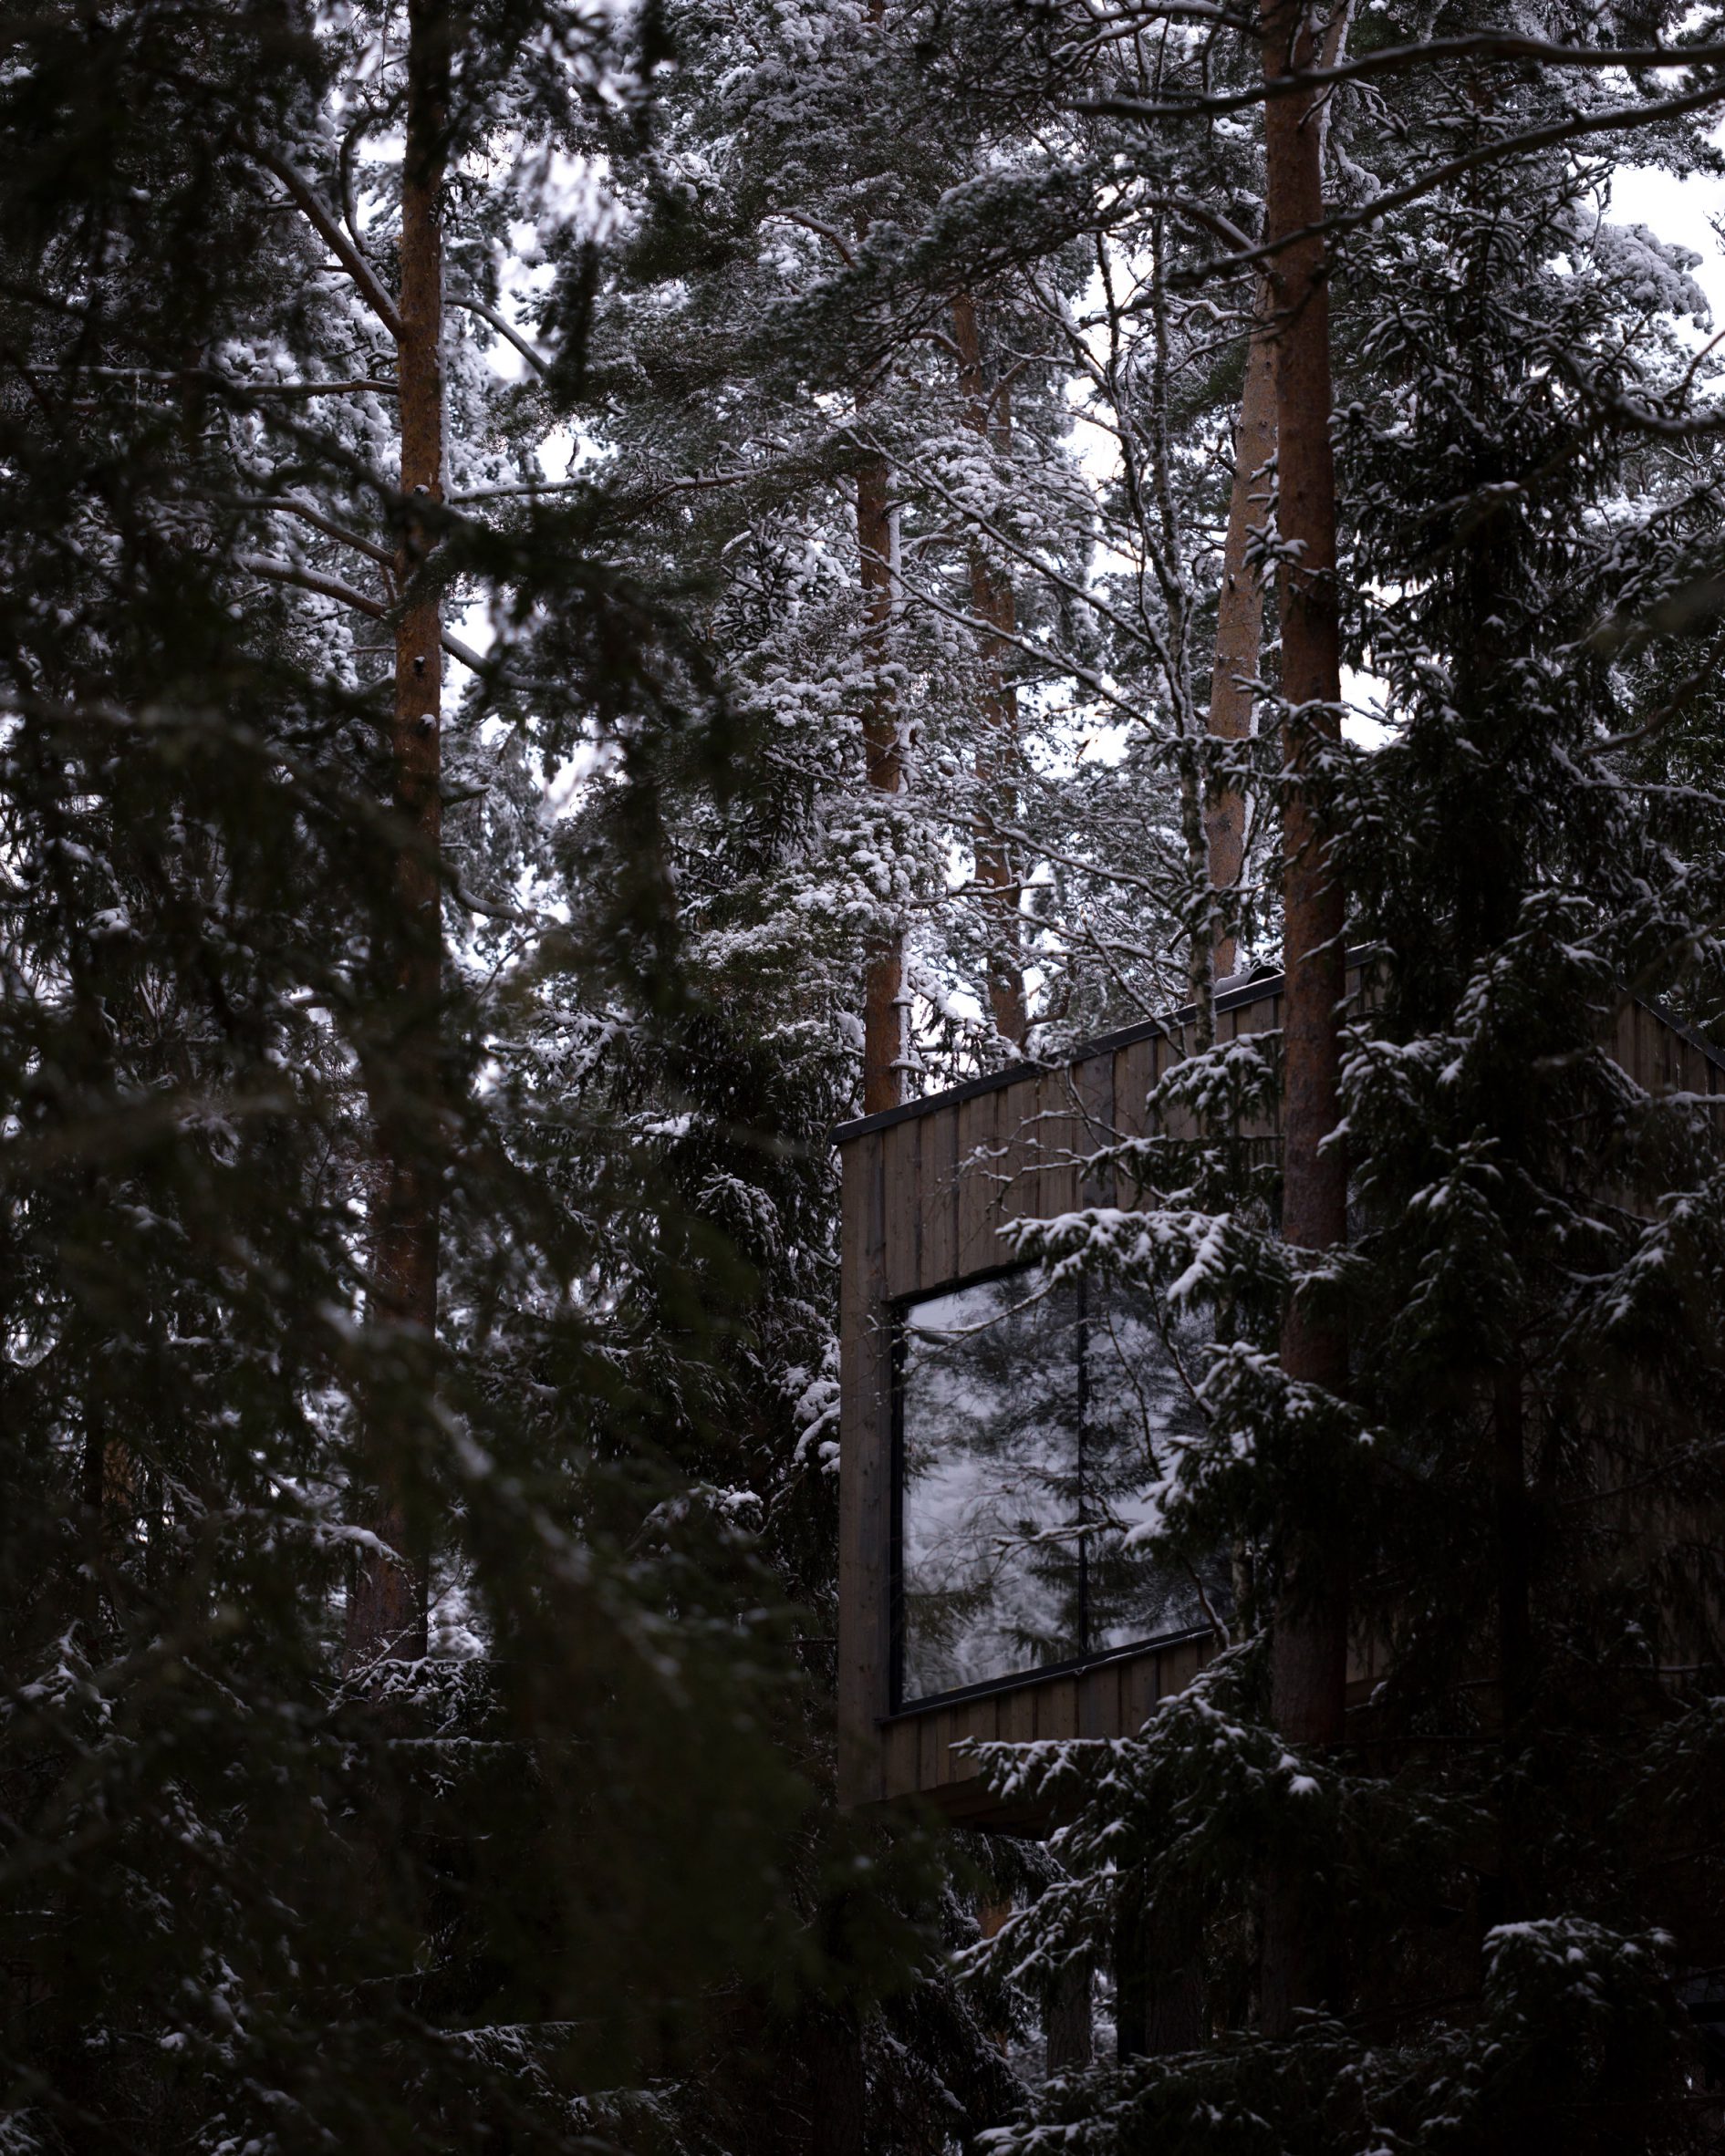 Glimpse of Trakt Forest Hotel suite through trees